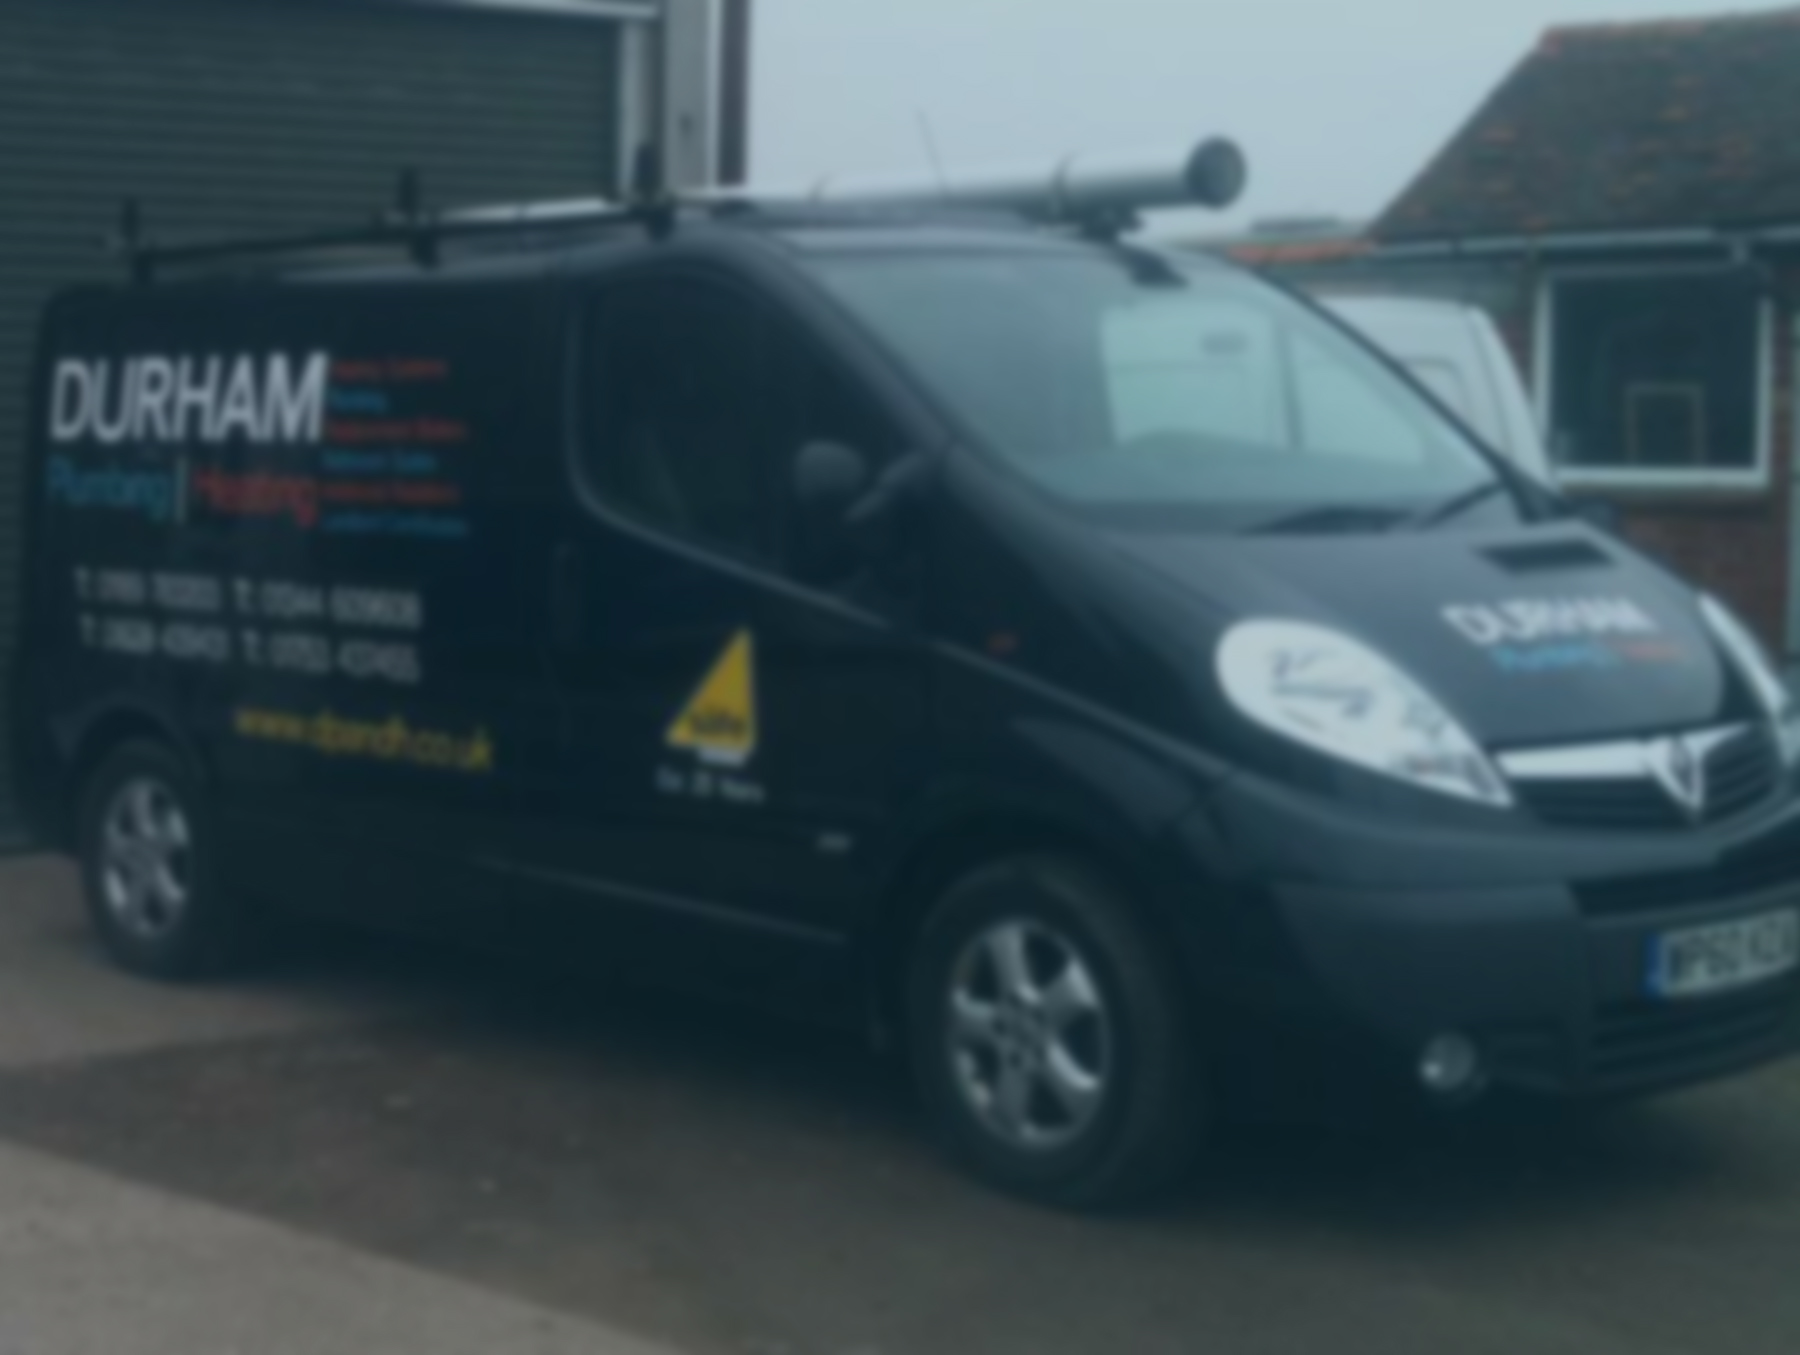 durham plumbing and heating's van parked outside their unit.